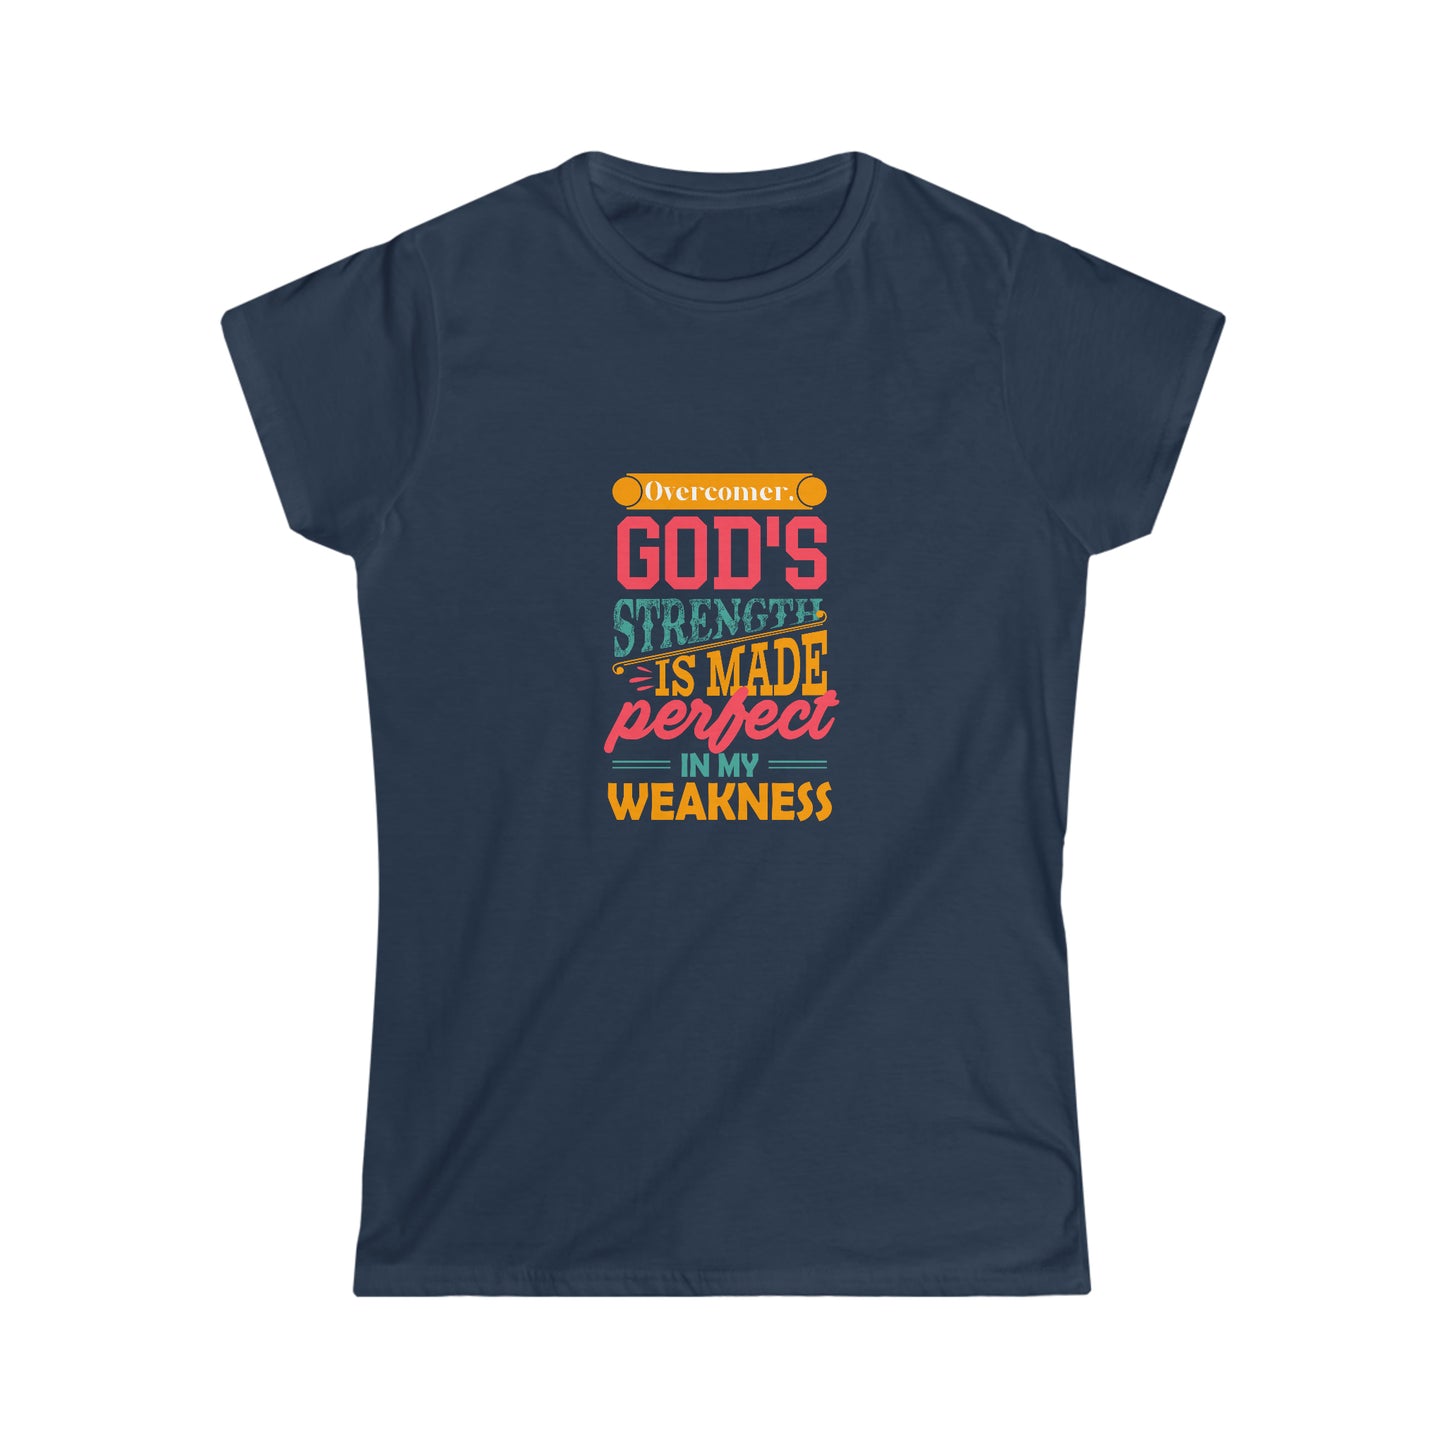 Overcomer, God's Strength Is Made Perfect In My Weakness  Women's T-shirt